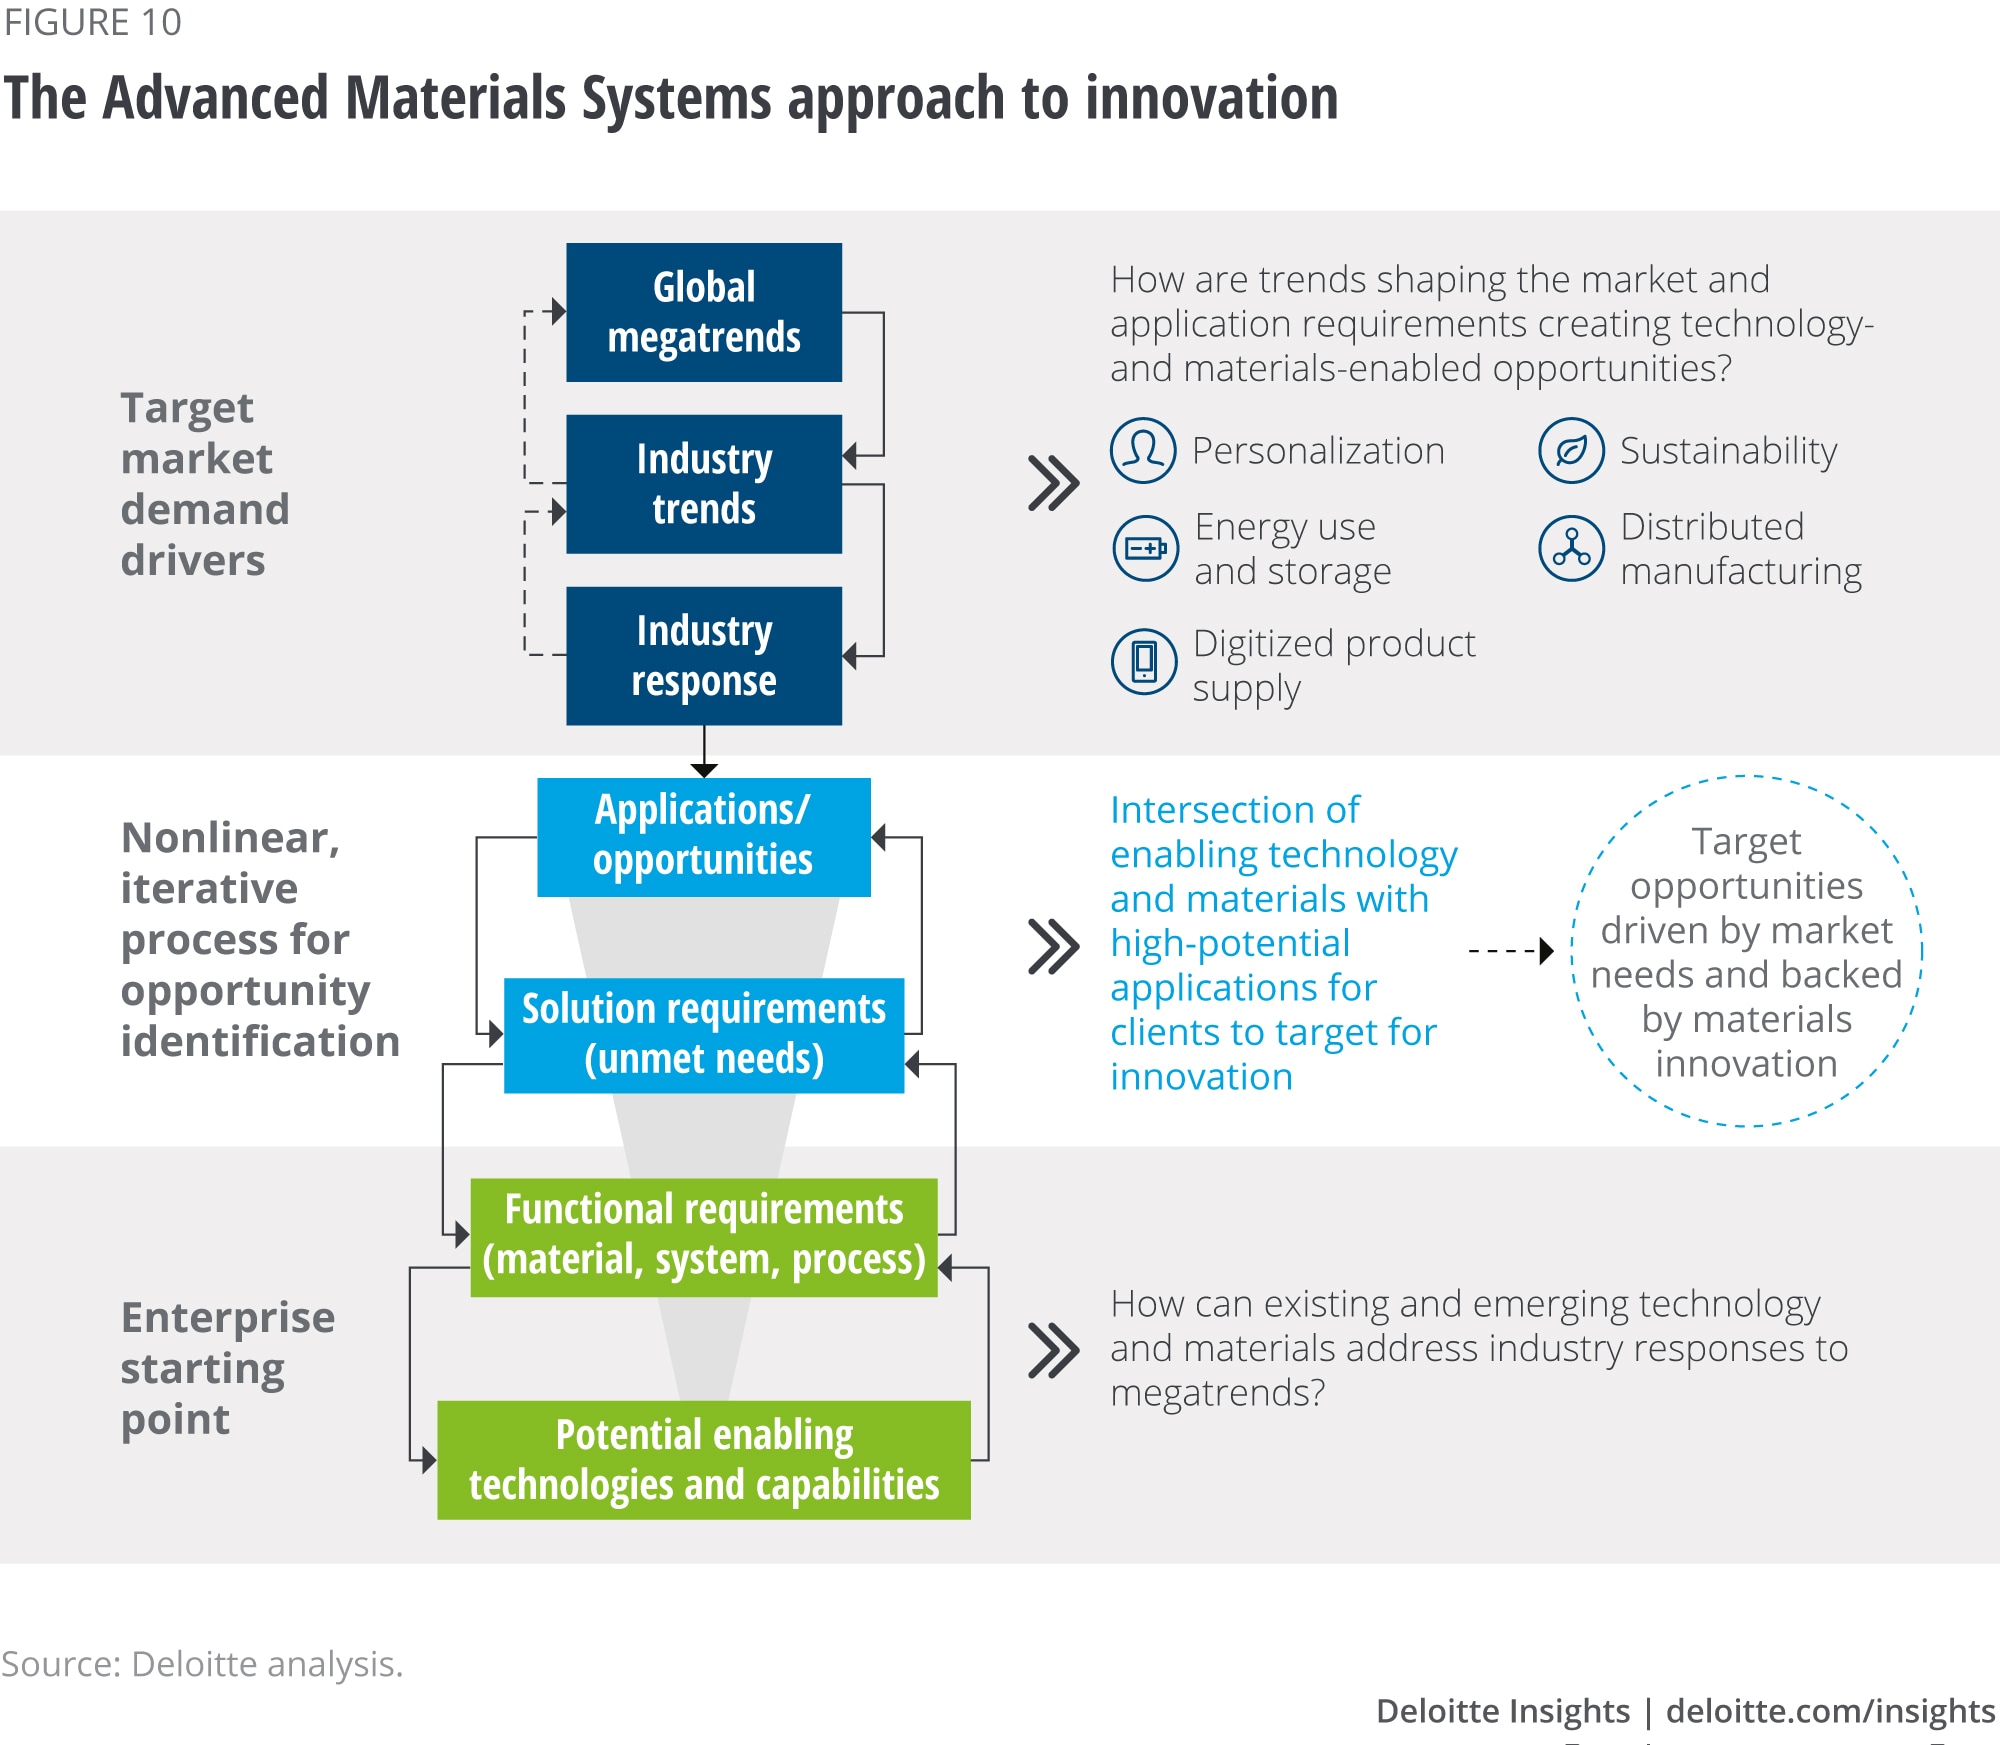 The Advanced Materials Systems approach to innovation